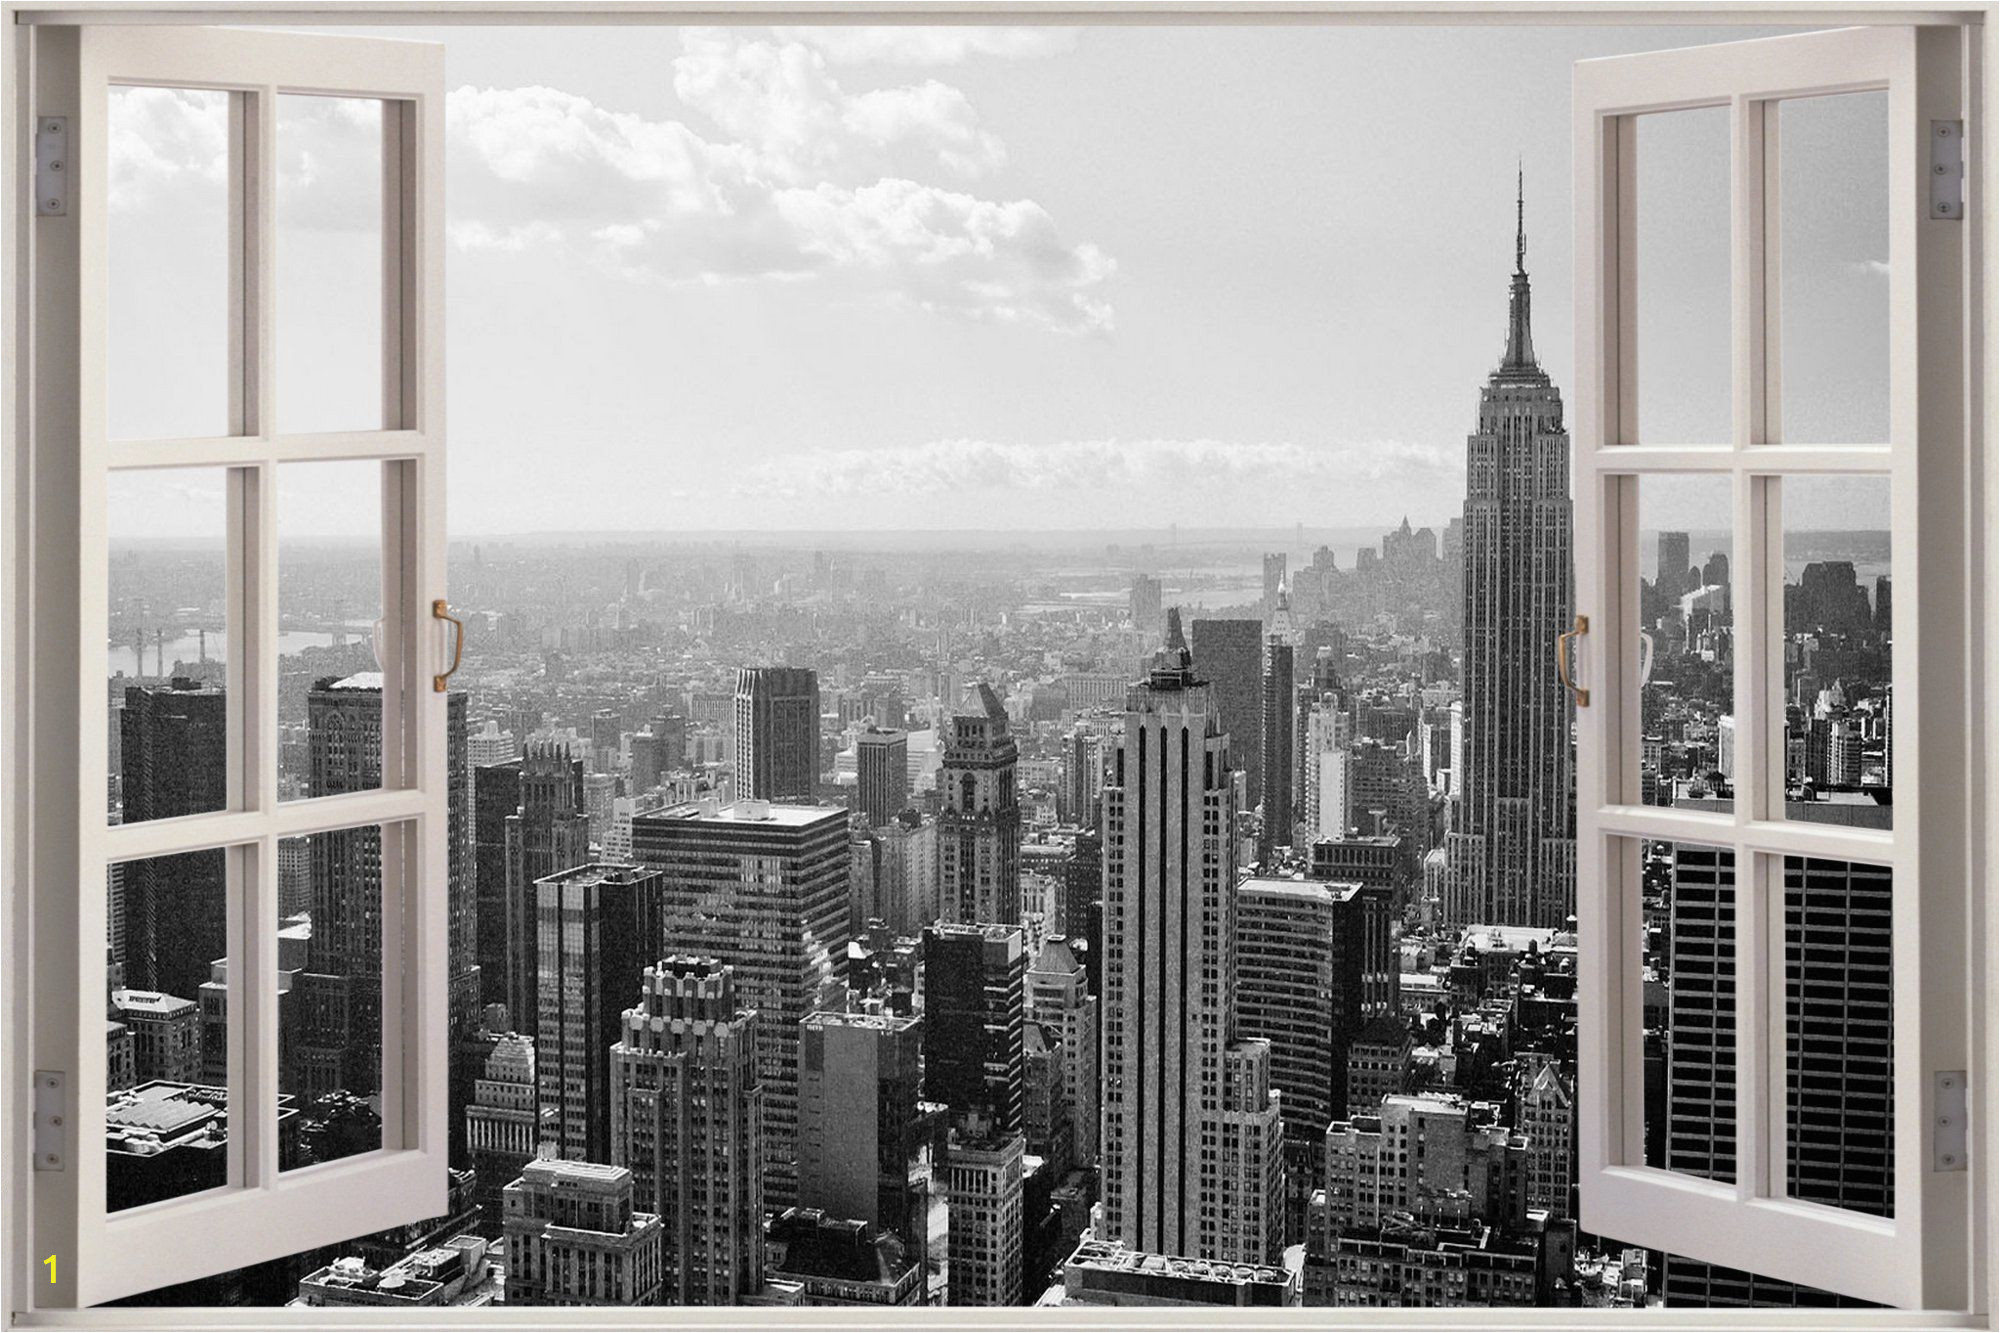 Nyc Lights Wall Mural Huge 3d Window New York City View Wall Stickers Mural